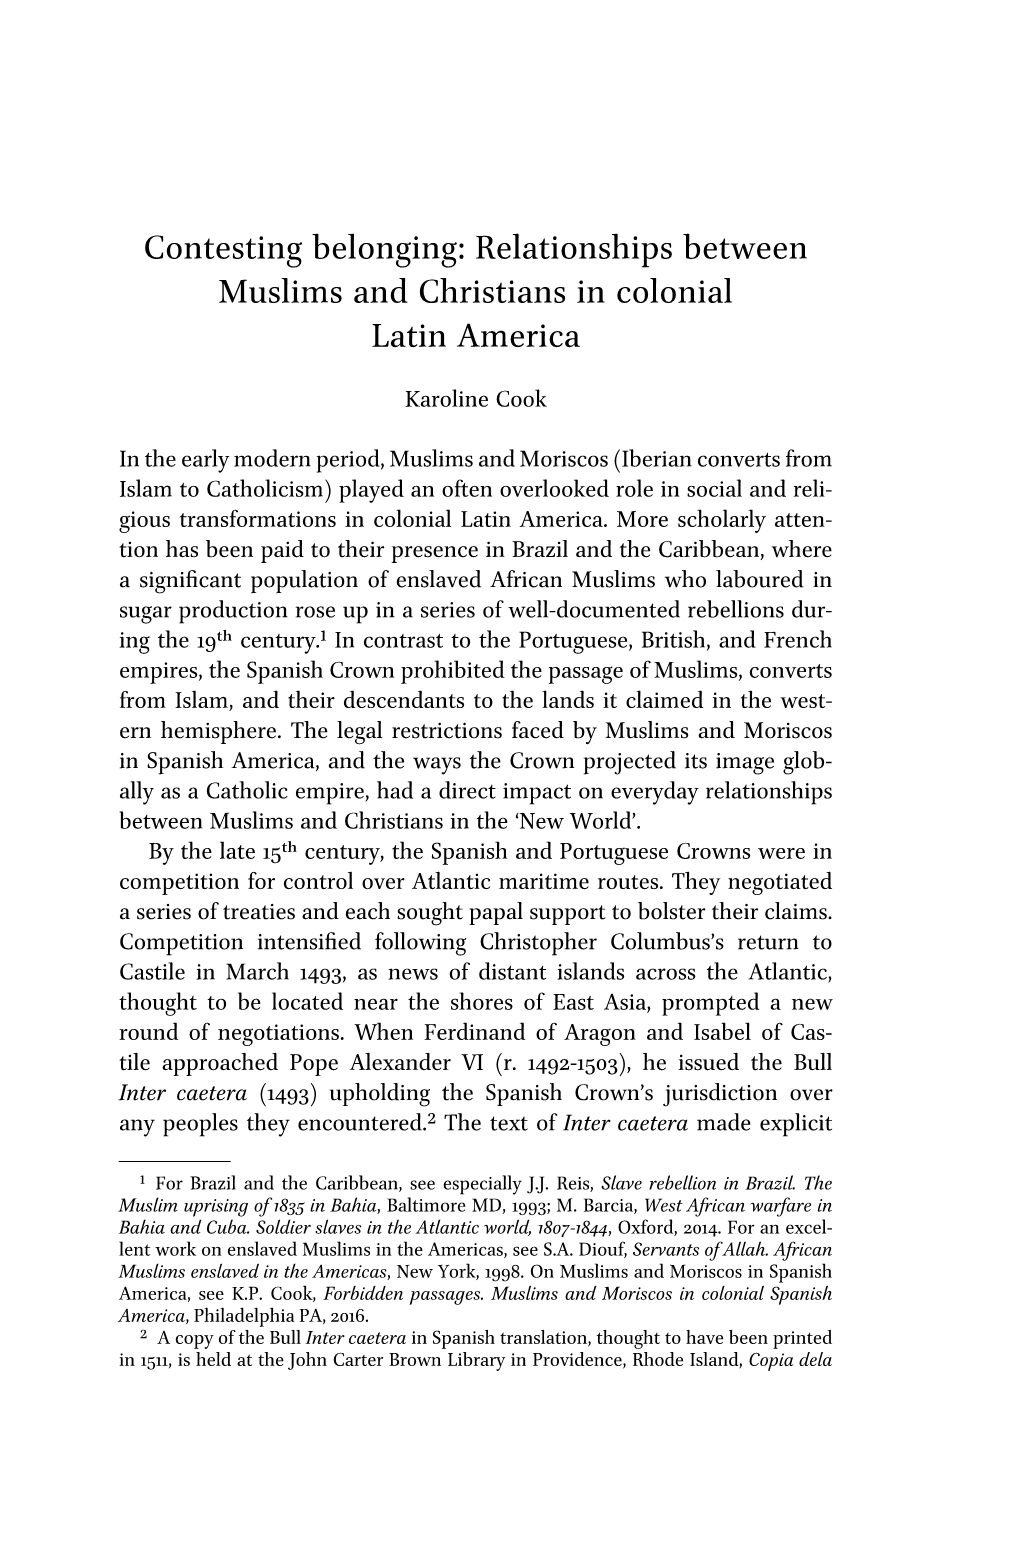 Relationships Between Muslims and Christians in Colonial Latin America